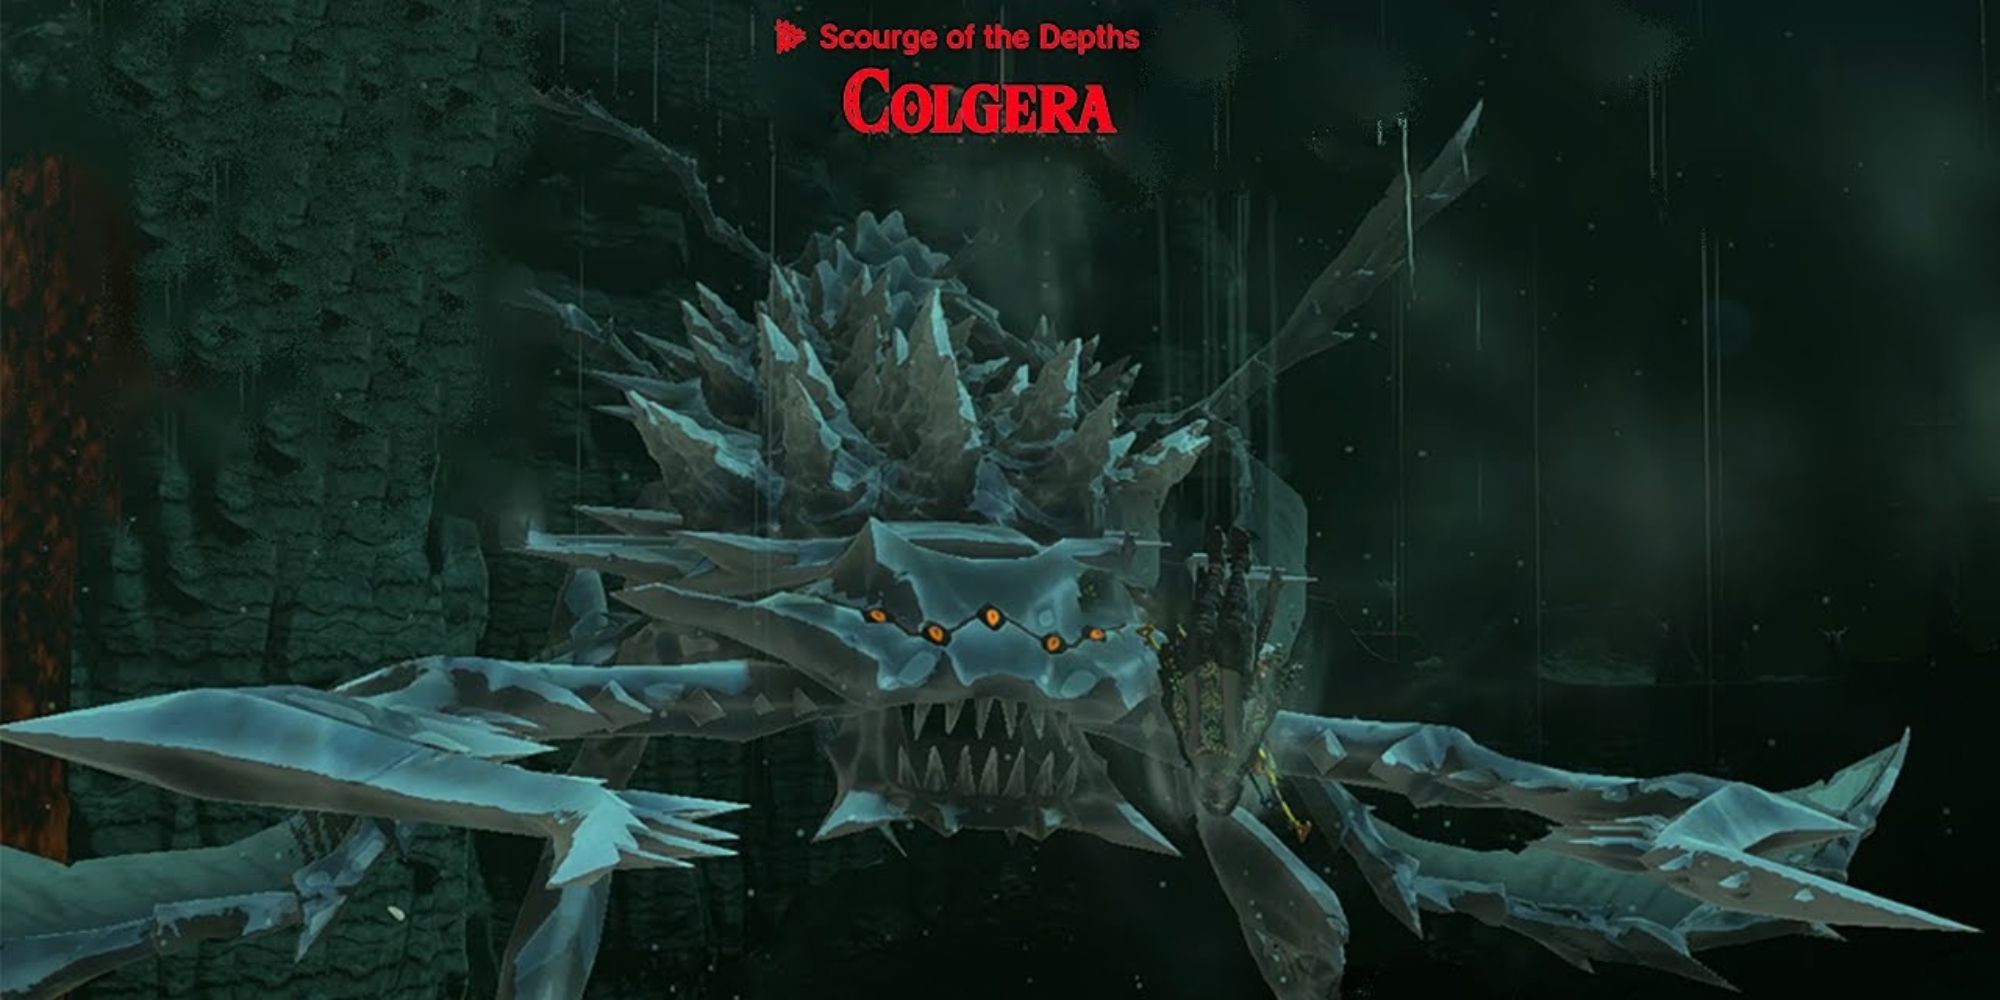 Colgera in the Depths